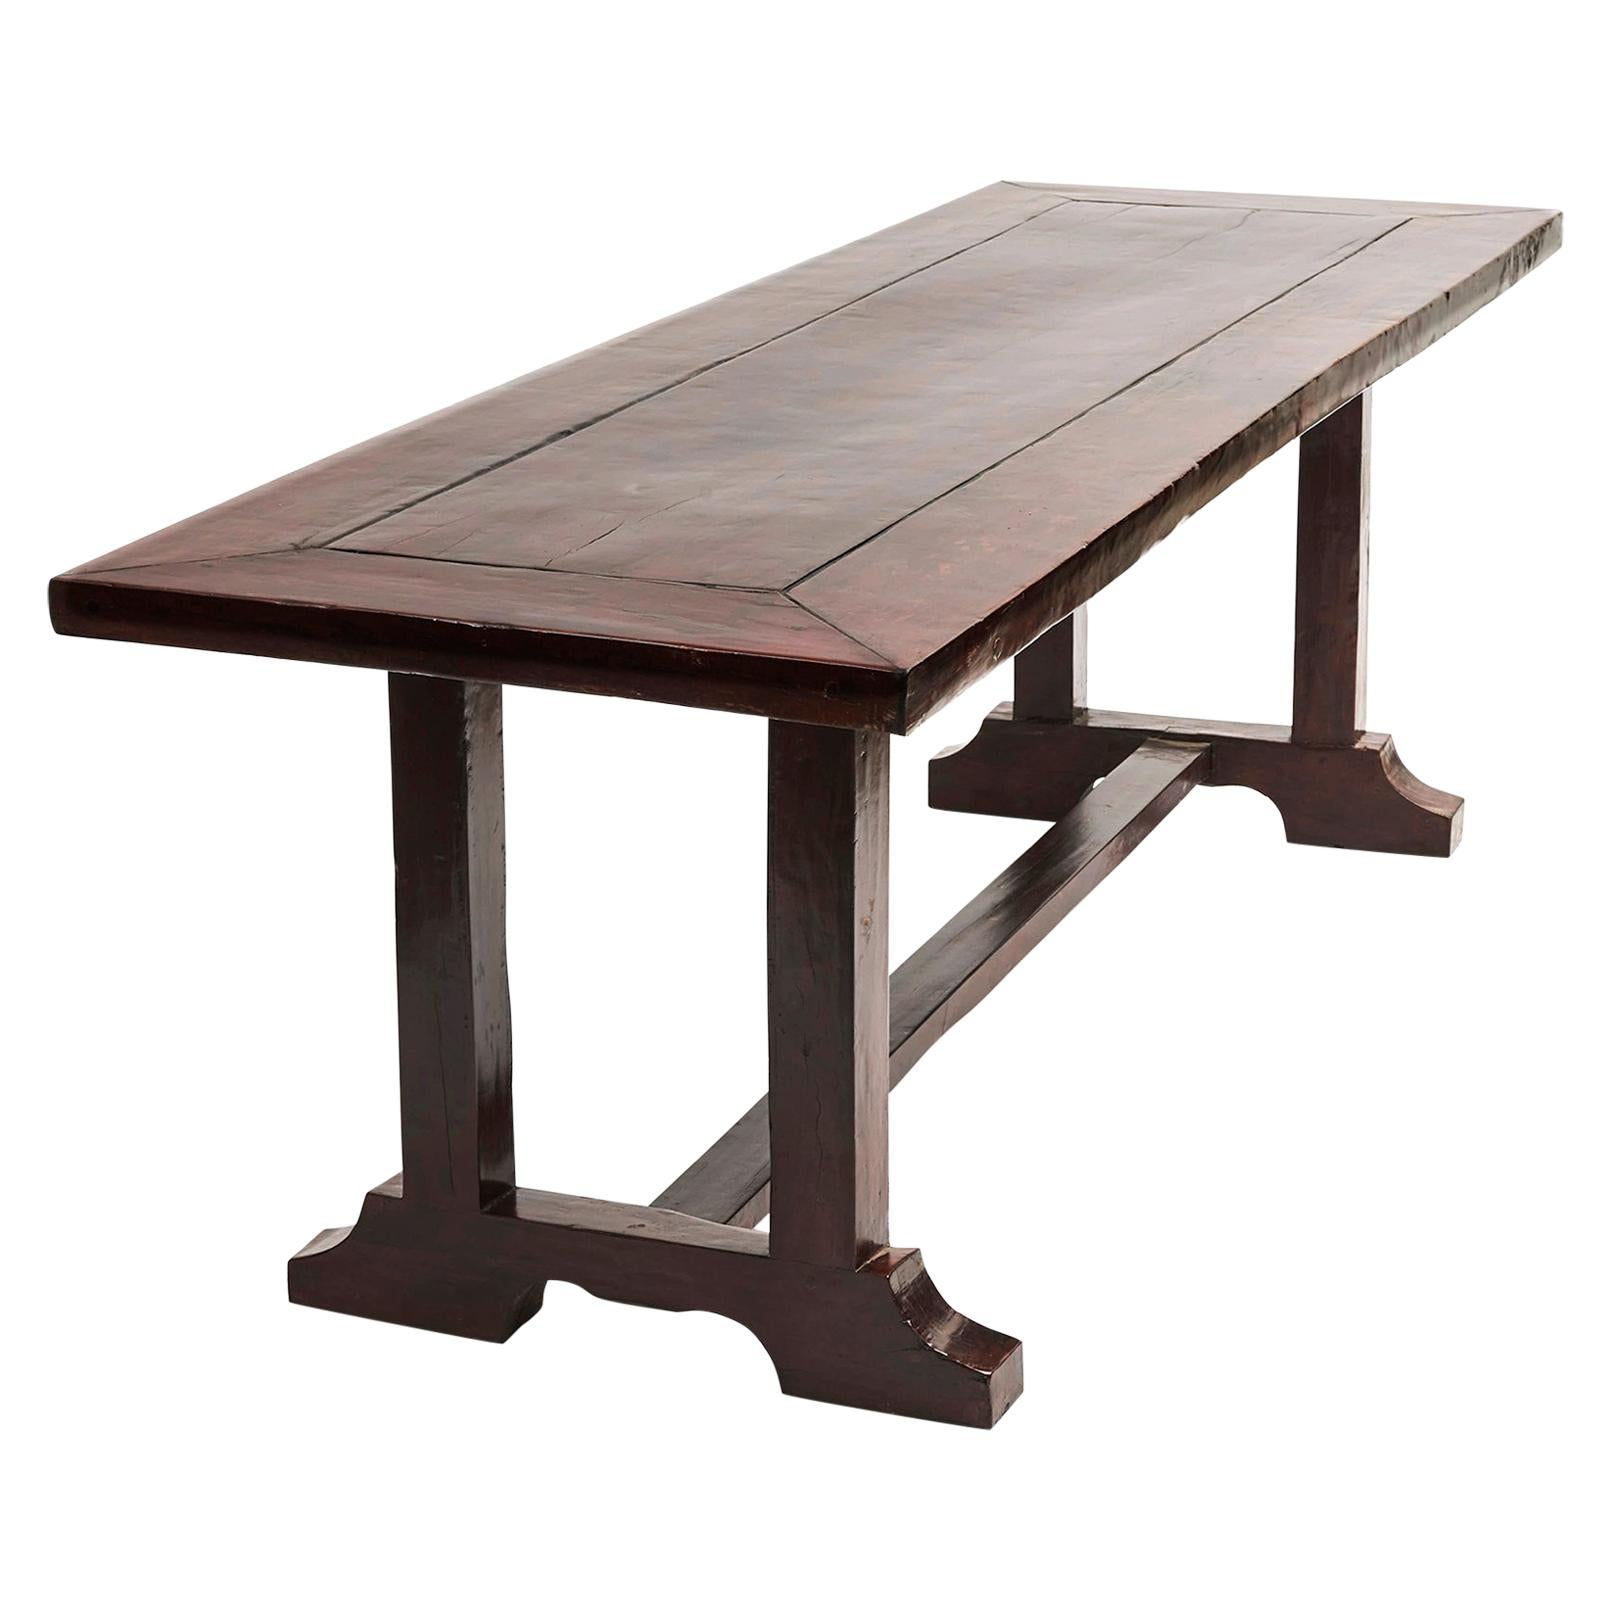 Spanish-Colonial Hardwood Long Dining Table from the Philippine, Baroque Style